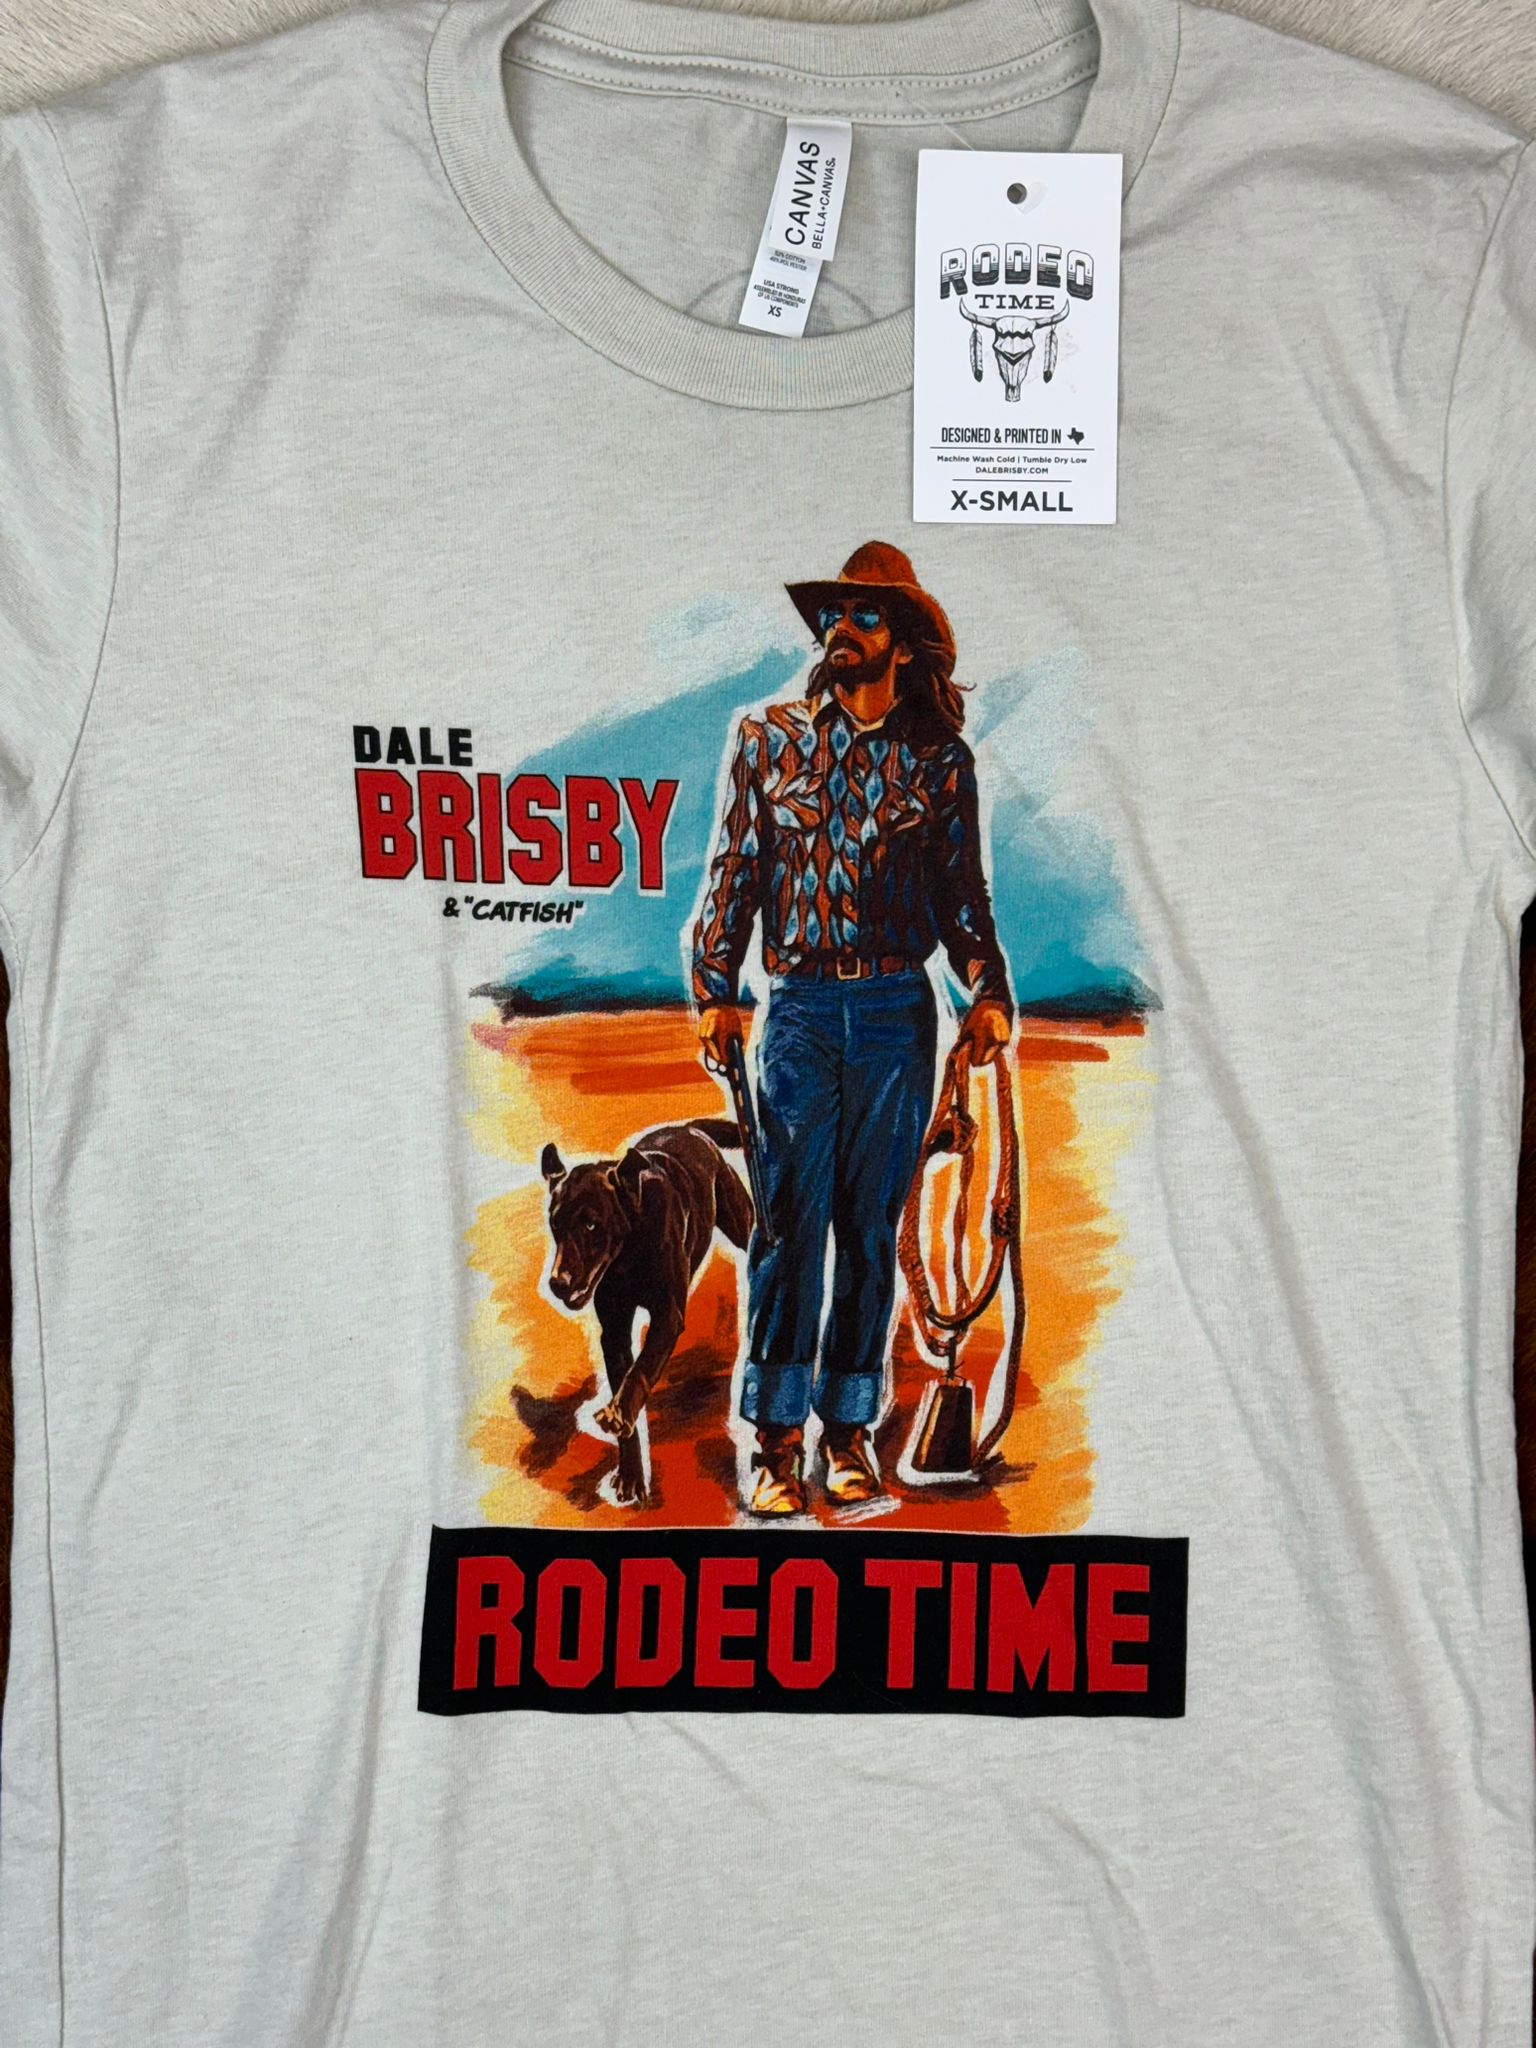 RODEO TIME X DALE BRISBY GRAPHIC TEE PORTRAIT OFF WHITE SHORT SLEEVE